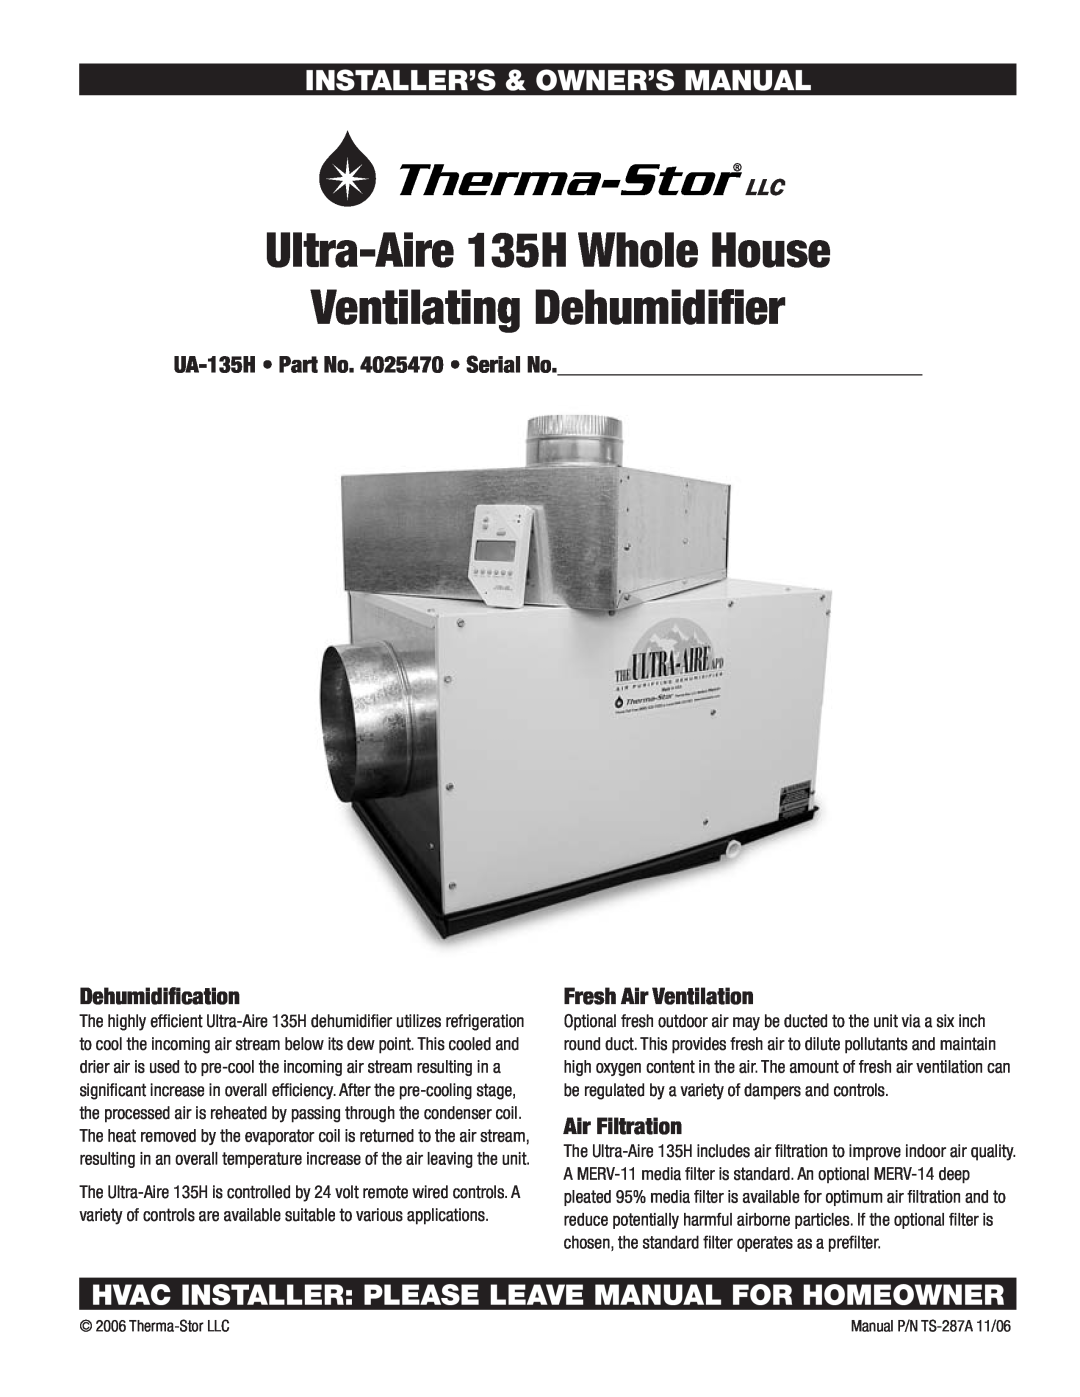 Therma-Stor Products Group UA-135H owner manual Installer’S & Owner’S Manual, Ultra-Aire135H Whole House, Dehumidification 